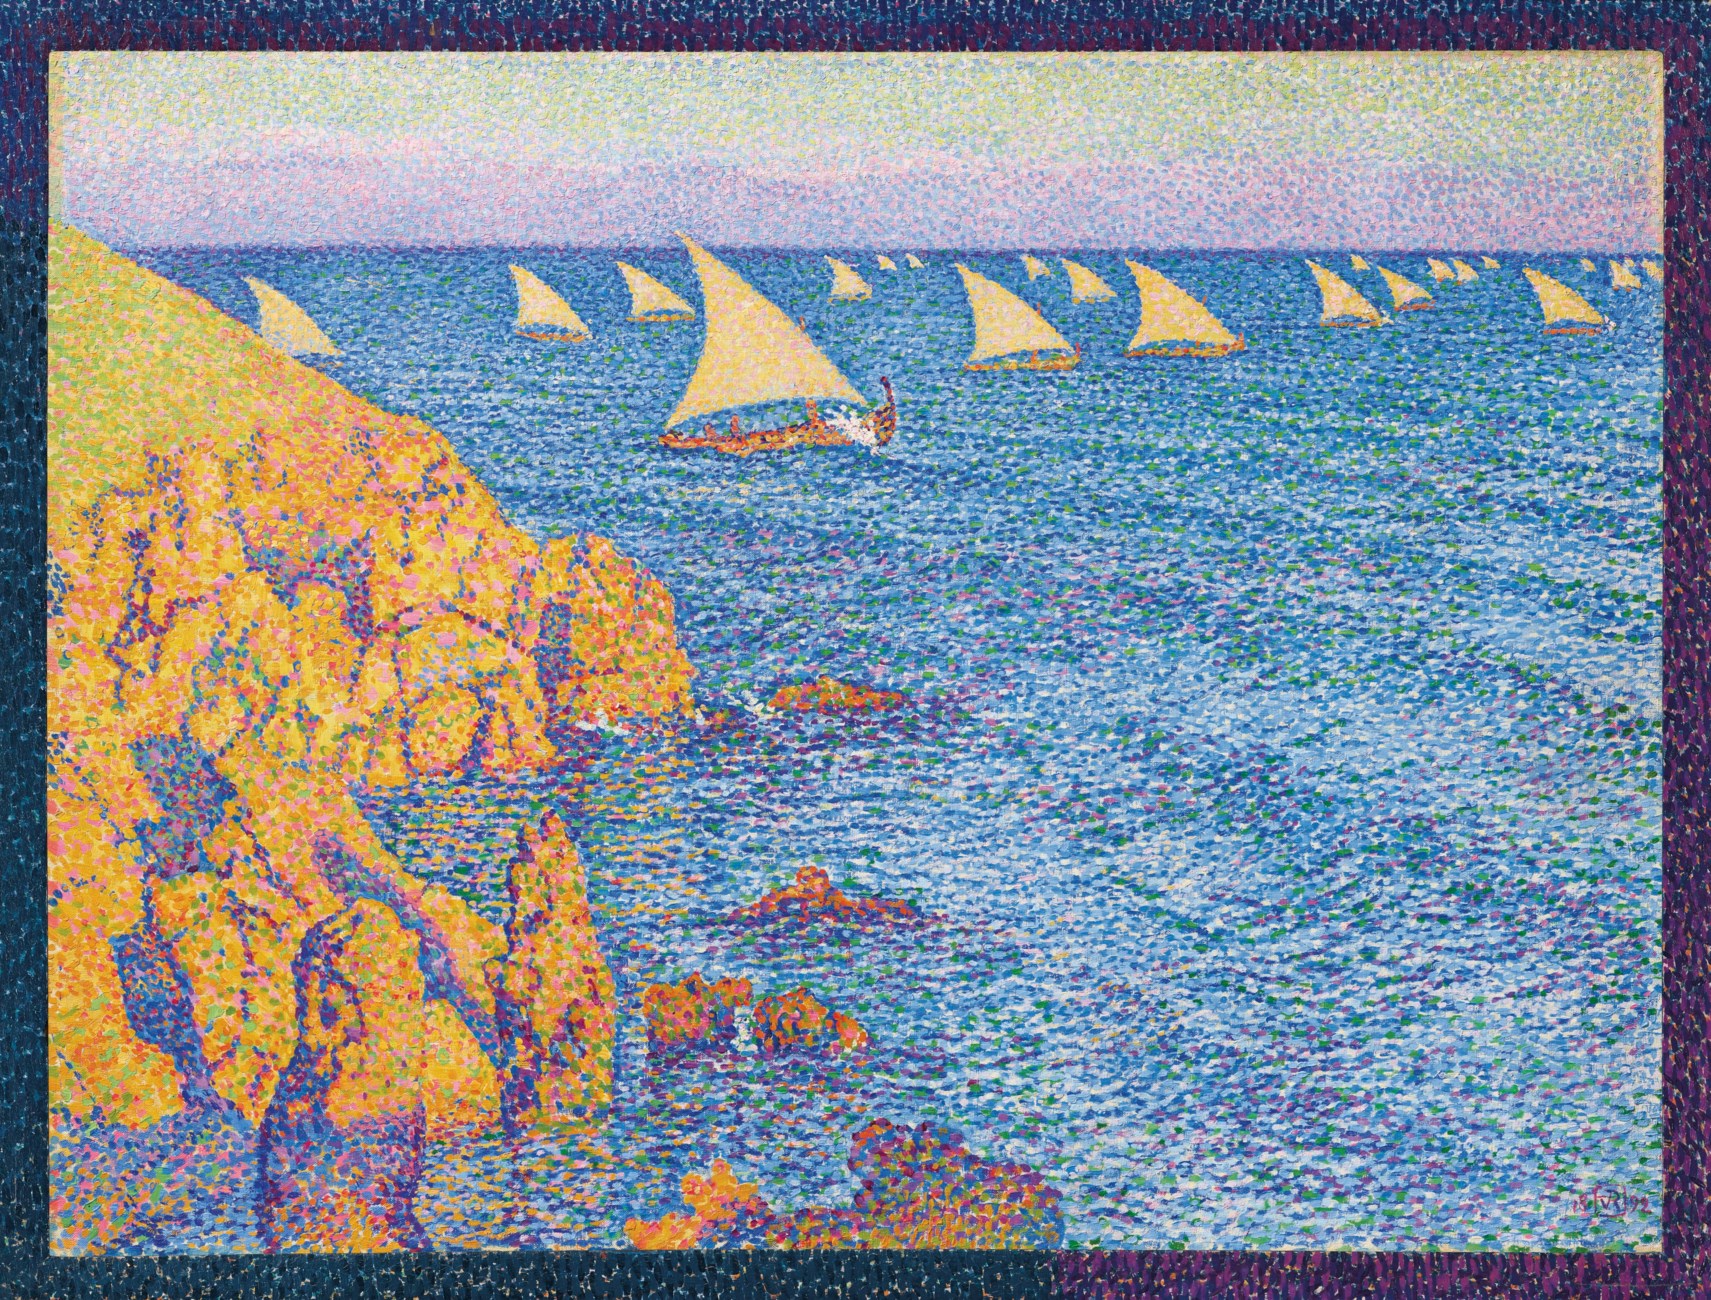 Fishing Boats by Theo van Rysselberghe - 1892 - 63 x 84 cm private collection